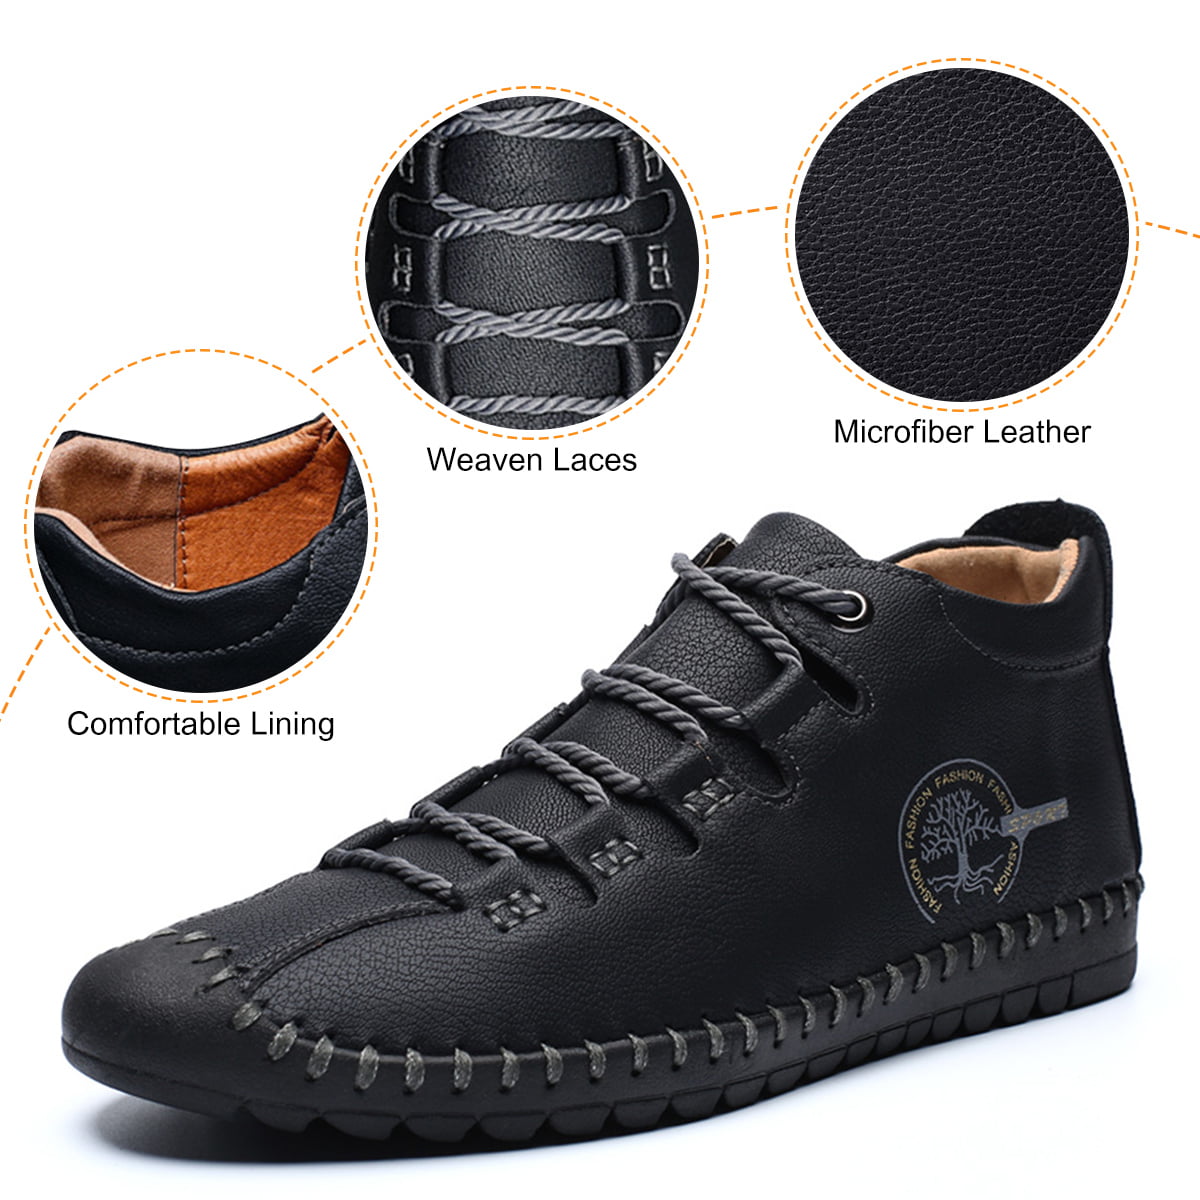 gracosy Mens Leather Oxford Shoes Casual Slip on Loafers Hand Stitching Vintage Comfort Walking Shoes Lace Up Moccasins Flats Dress Shoes